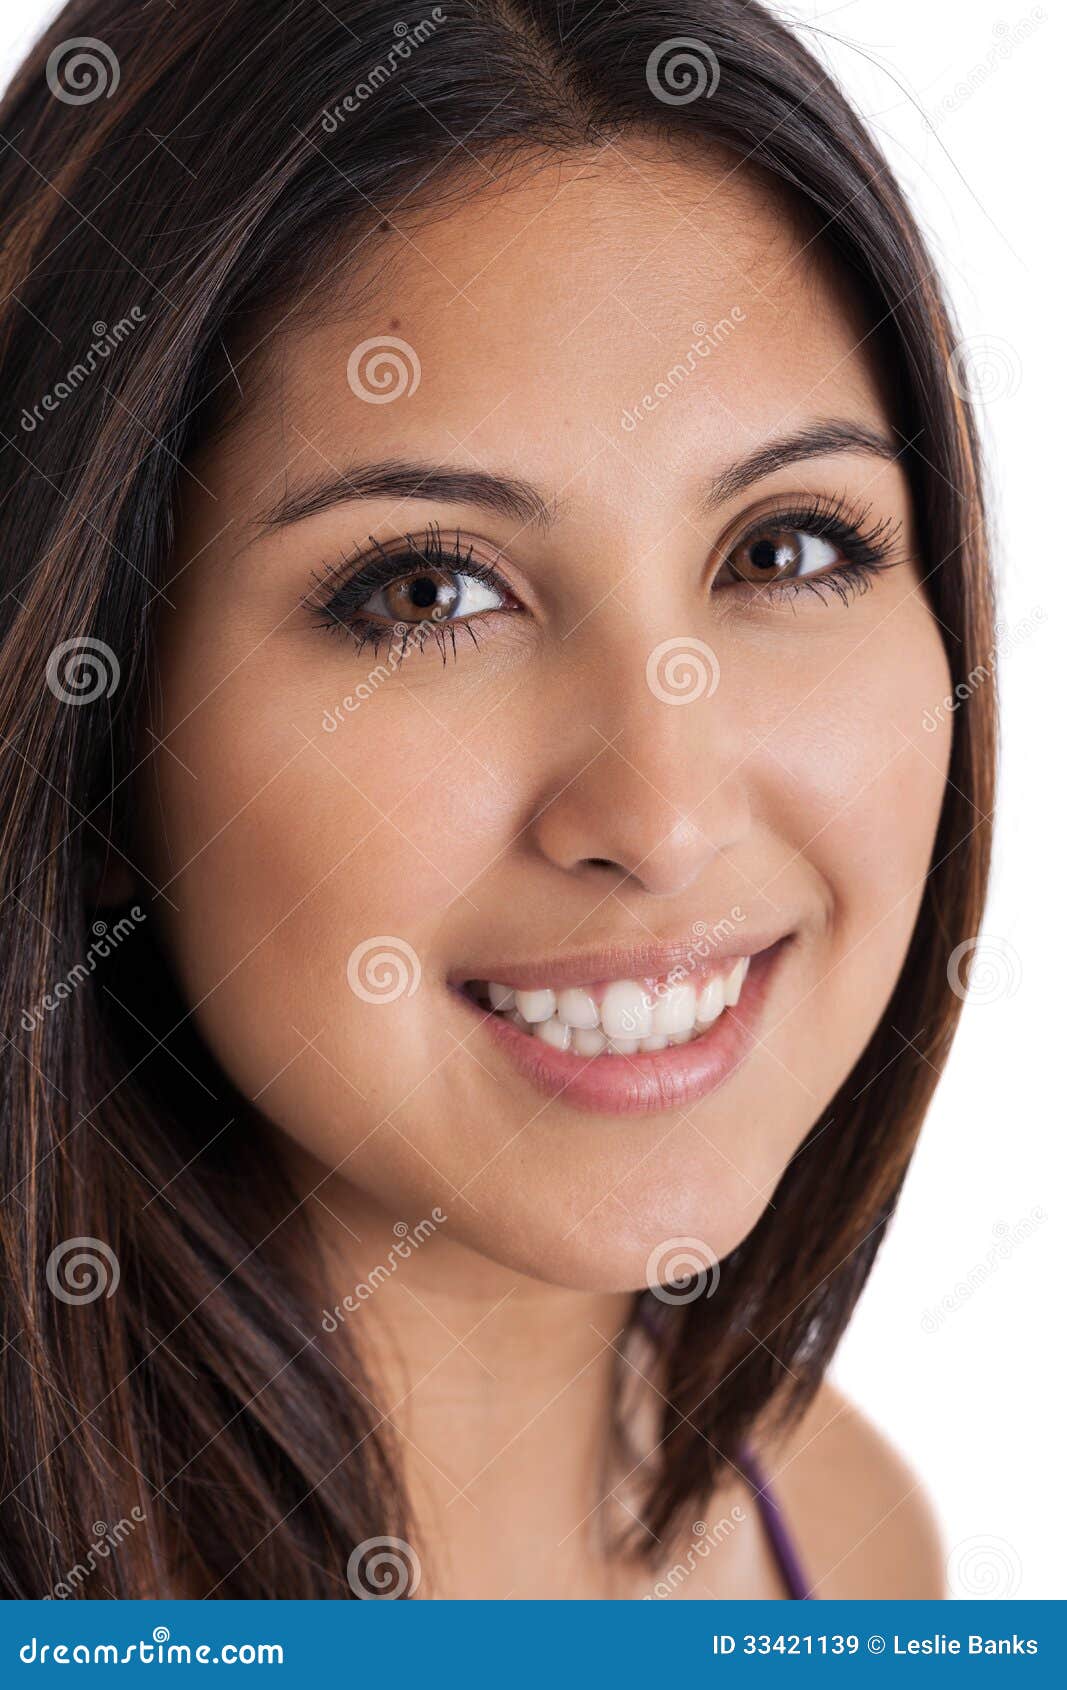 https://thumbs.dreamstime.com/z/beautiful-woman-close-up-closeup-portrait-mixed-race-mexican-japanese-her-early-s-33421139.jpg